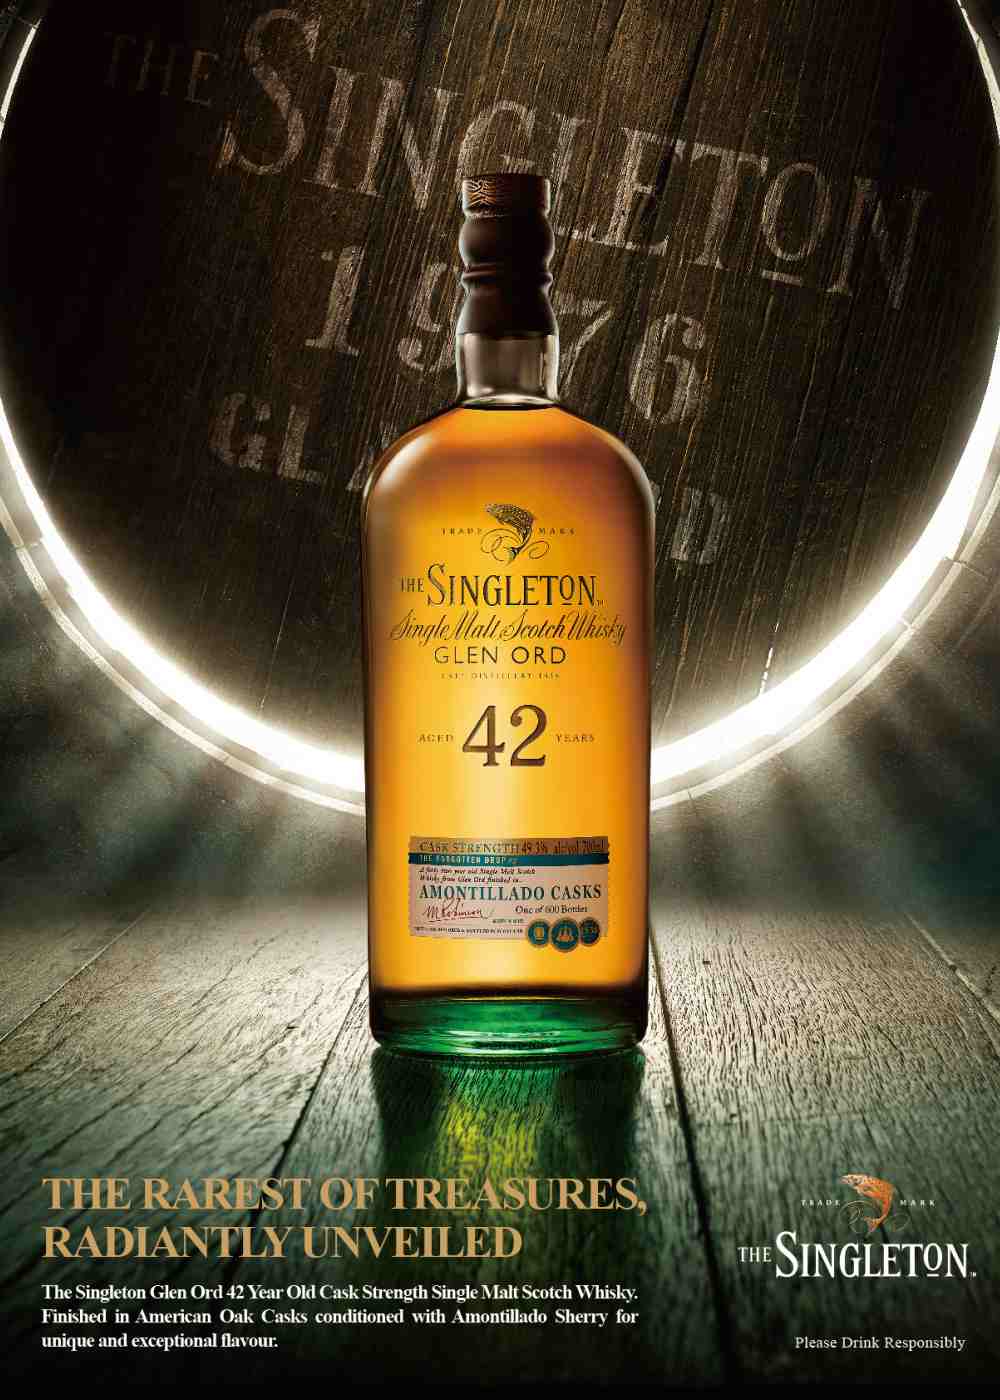 Limited Edition The Singleton of Glen Ord 42 Year Old in High Poster - 苏格兰的时光窖藏：Singleton of Glen Ord 42年限量套装